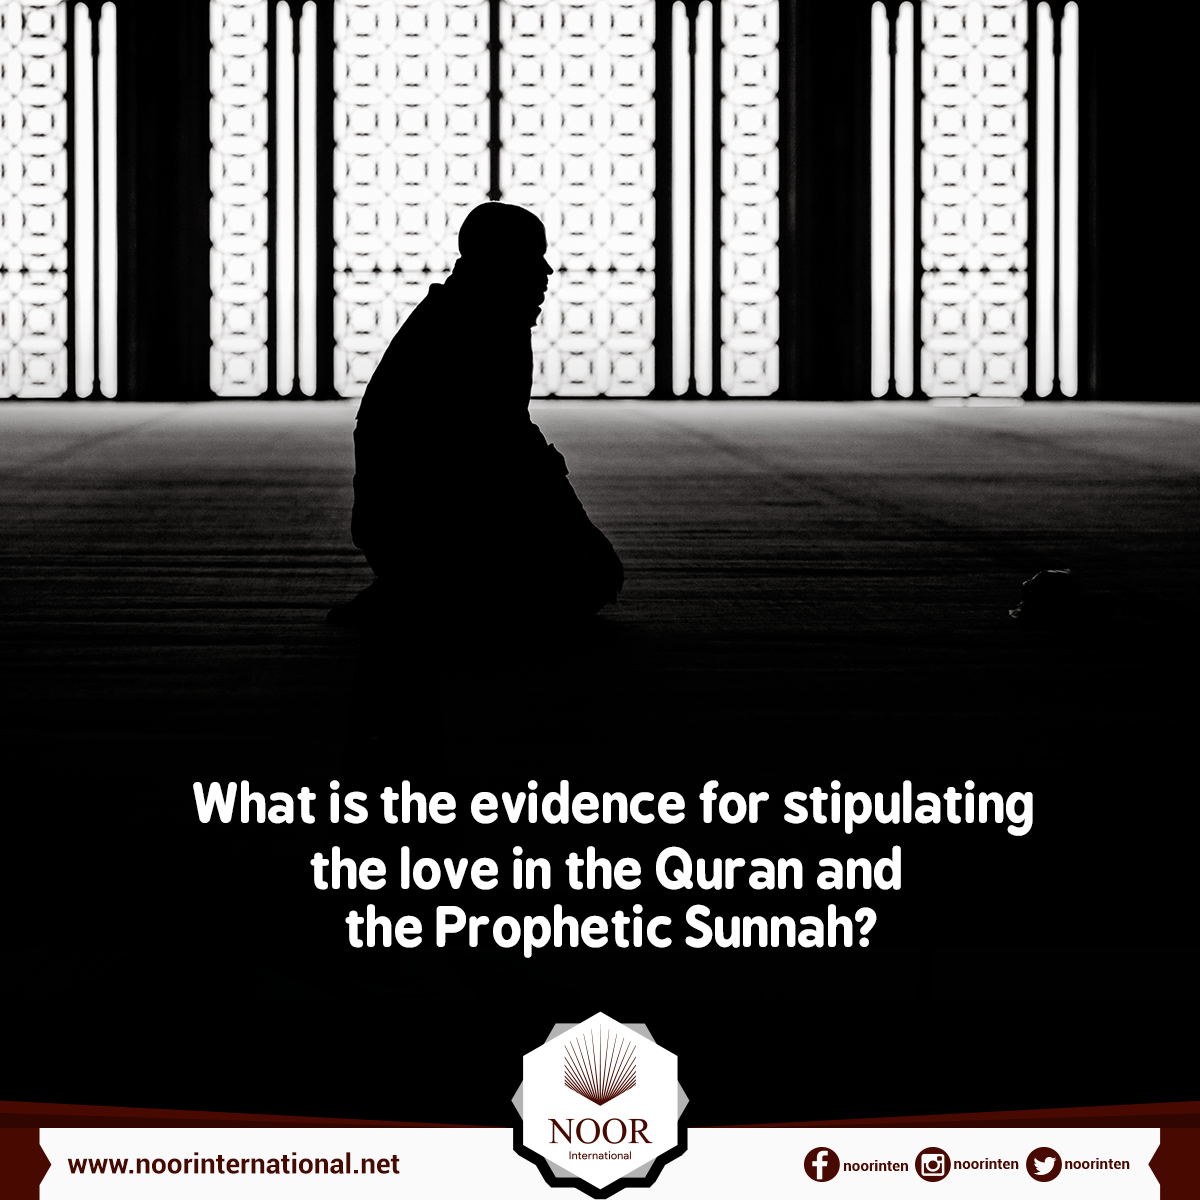 What is the evidence for stipulating the love in the Quran and the Prophetic Sunnah?